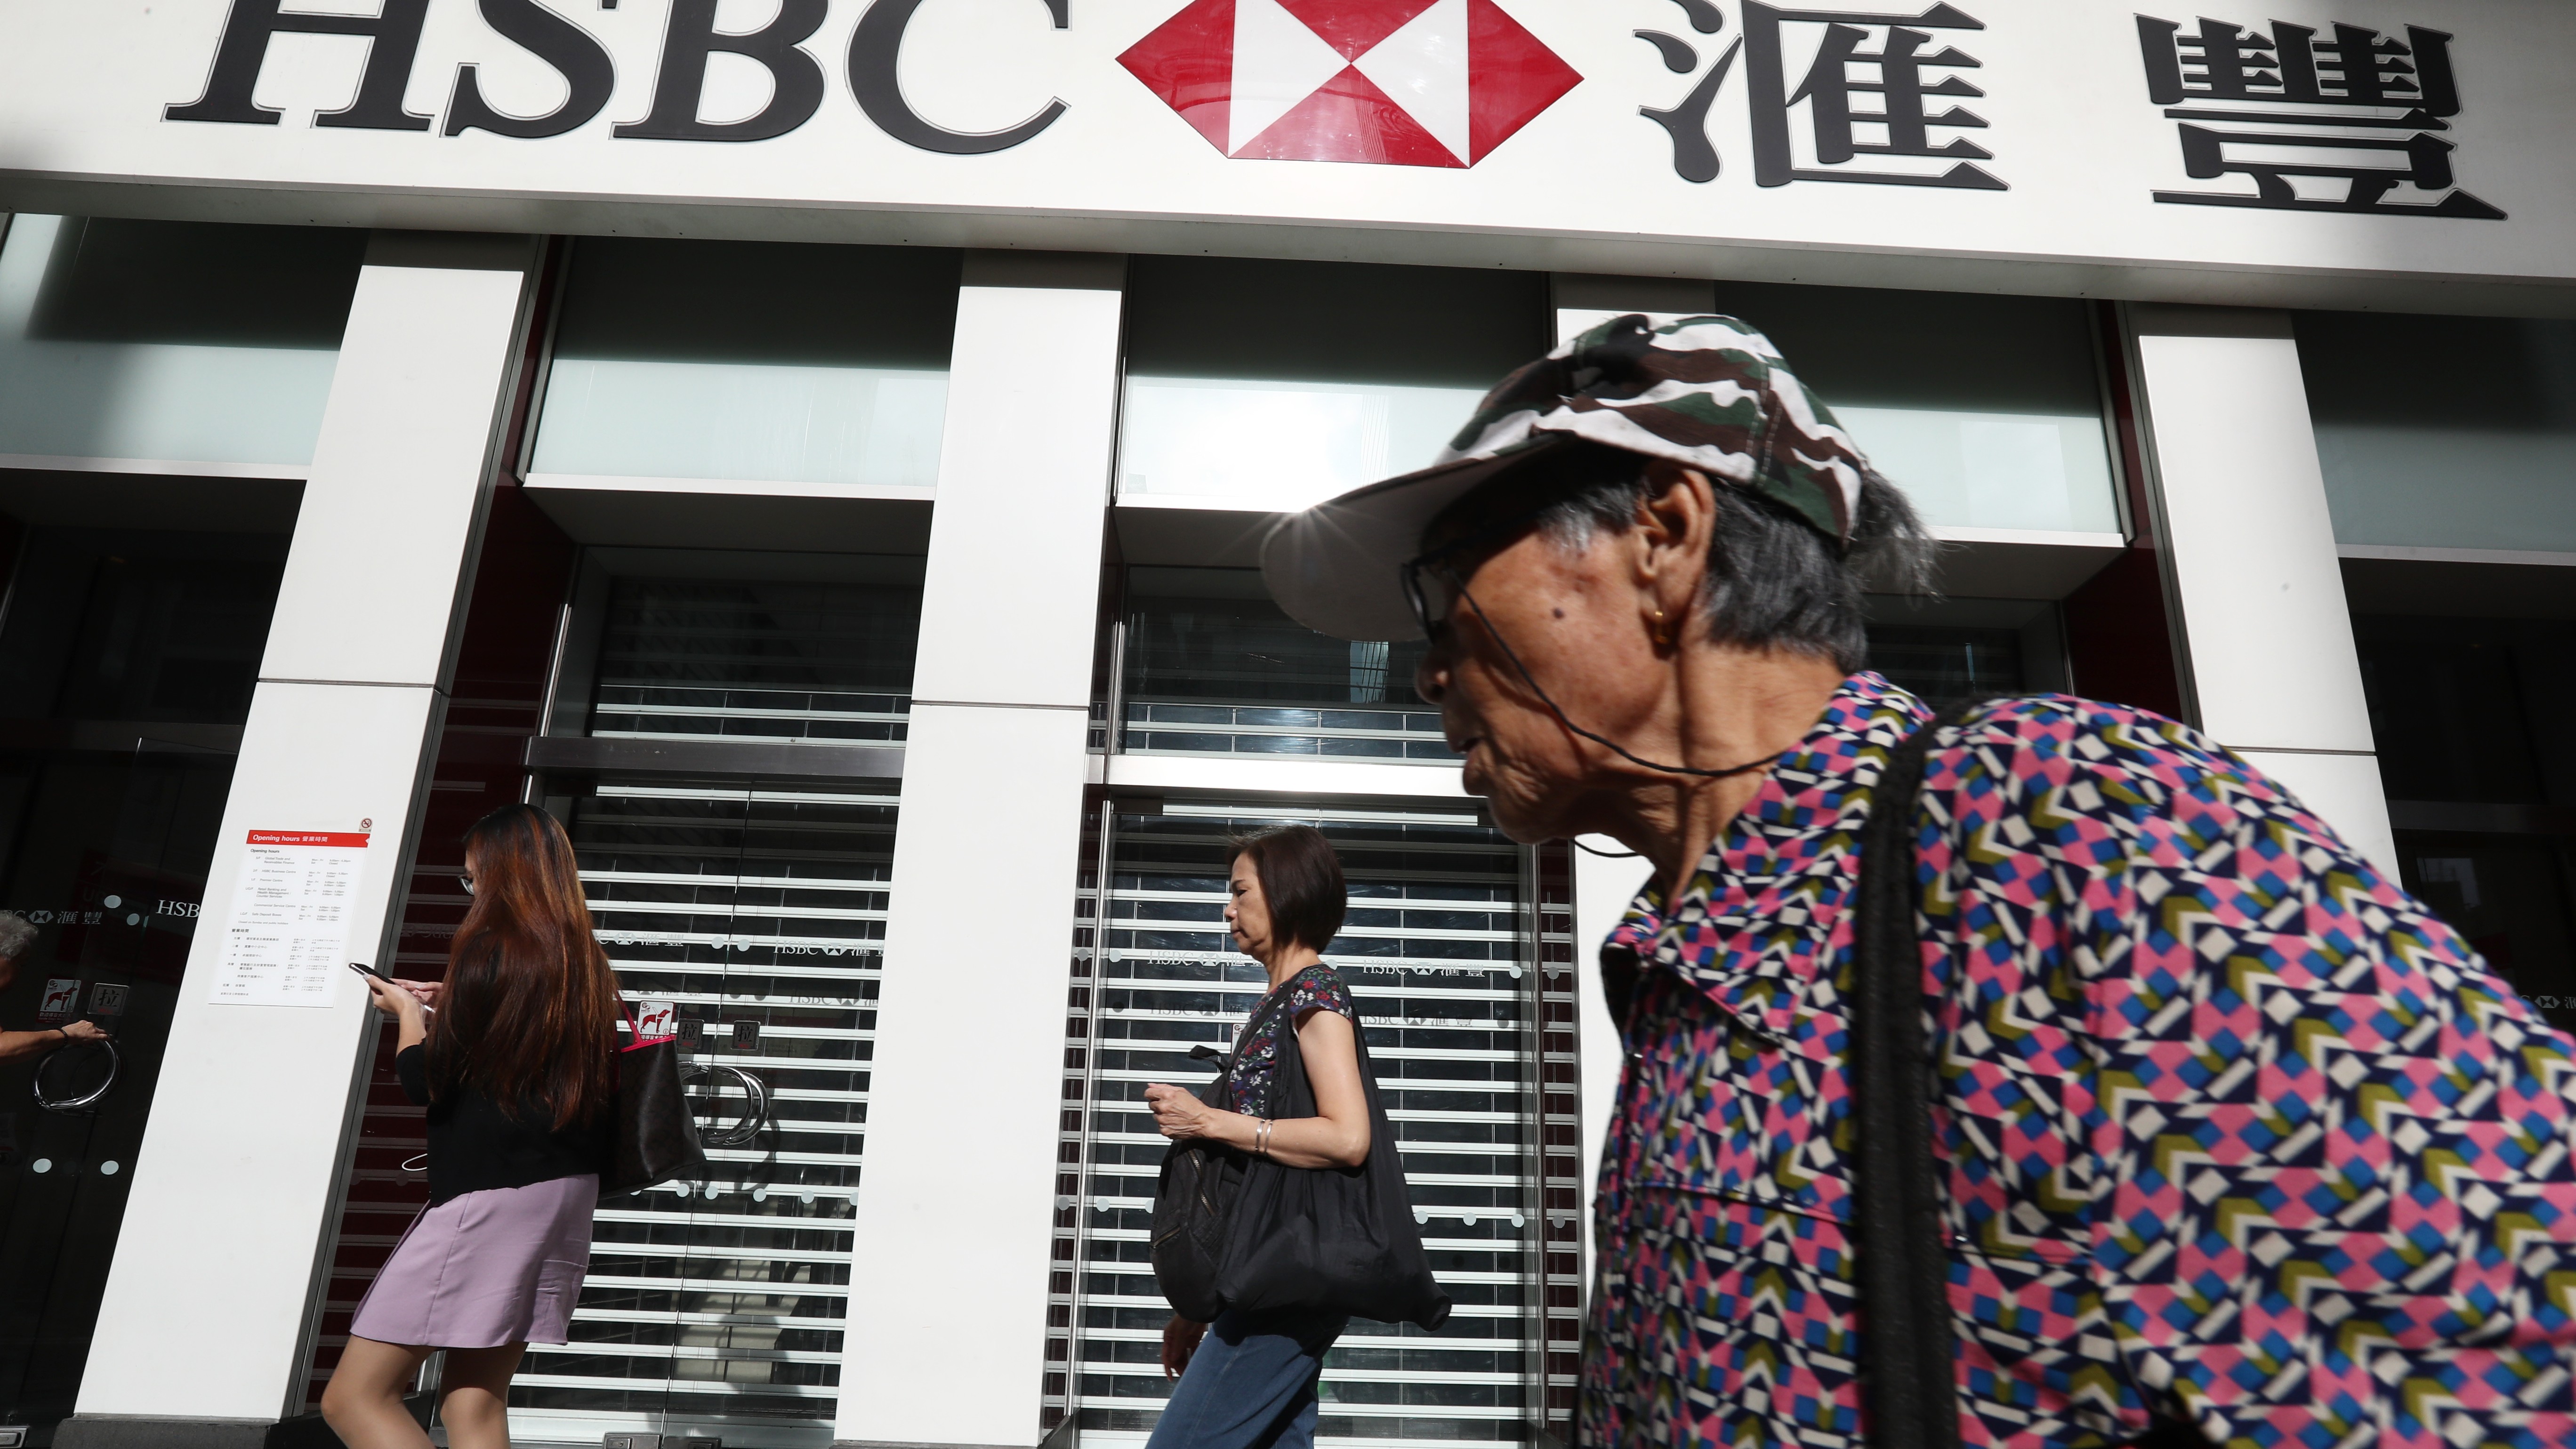 The first day of registration for the public annuity scheme started off slowly with only a few retirees queuing up at HSBC’s Mong Kok branch. Photo: Nora Tam